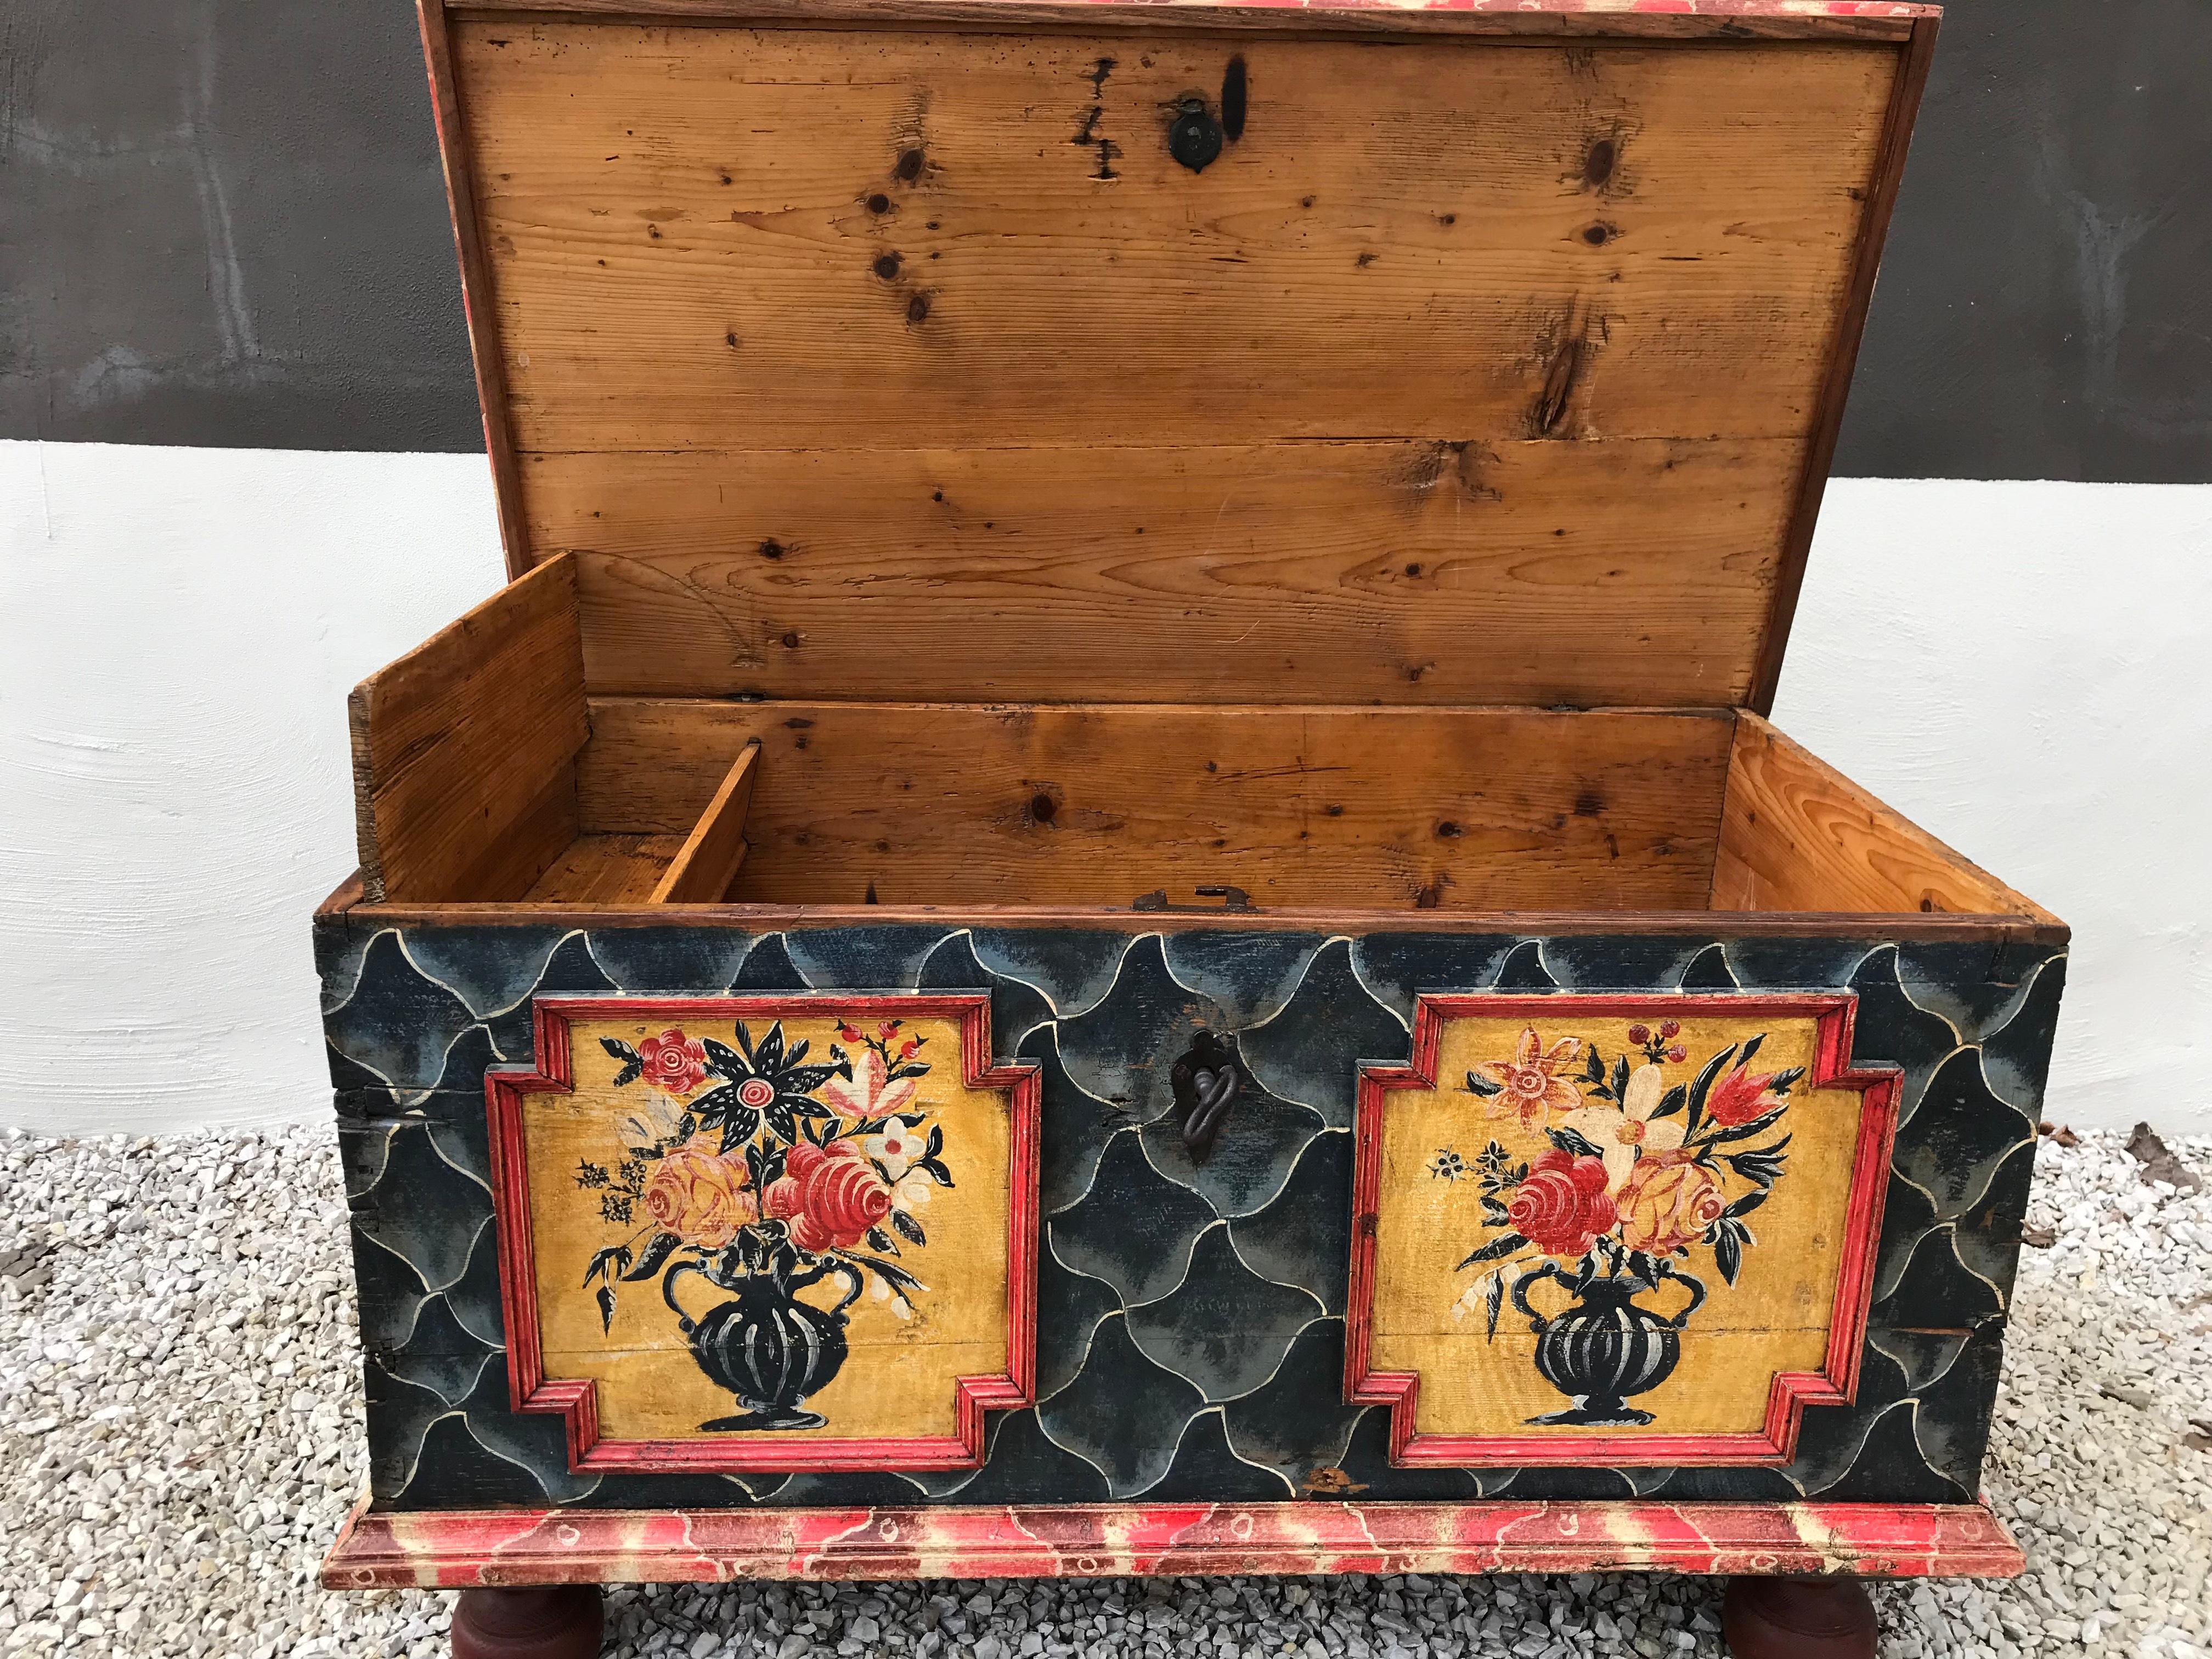 This painted chest comes from the Czech republic,
year 1804.
Their wedding variants, which stood out for their rich painted decoration, had a special position among the chests. 